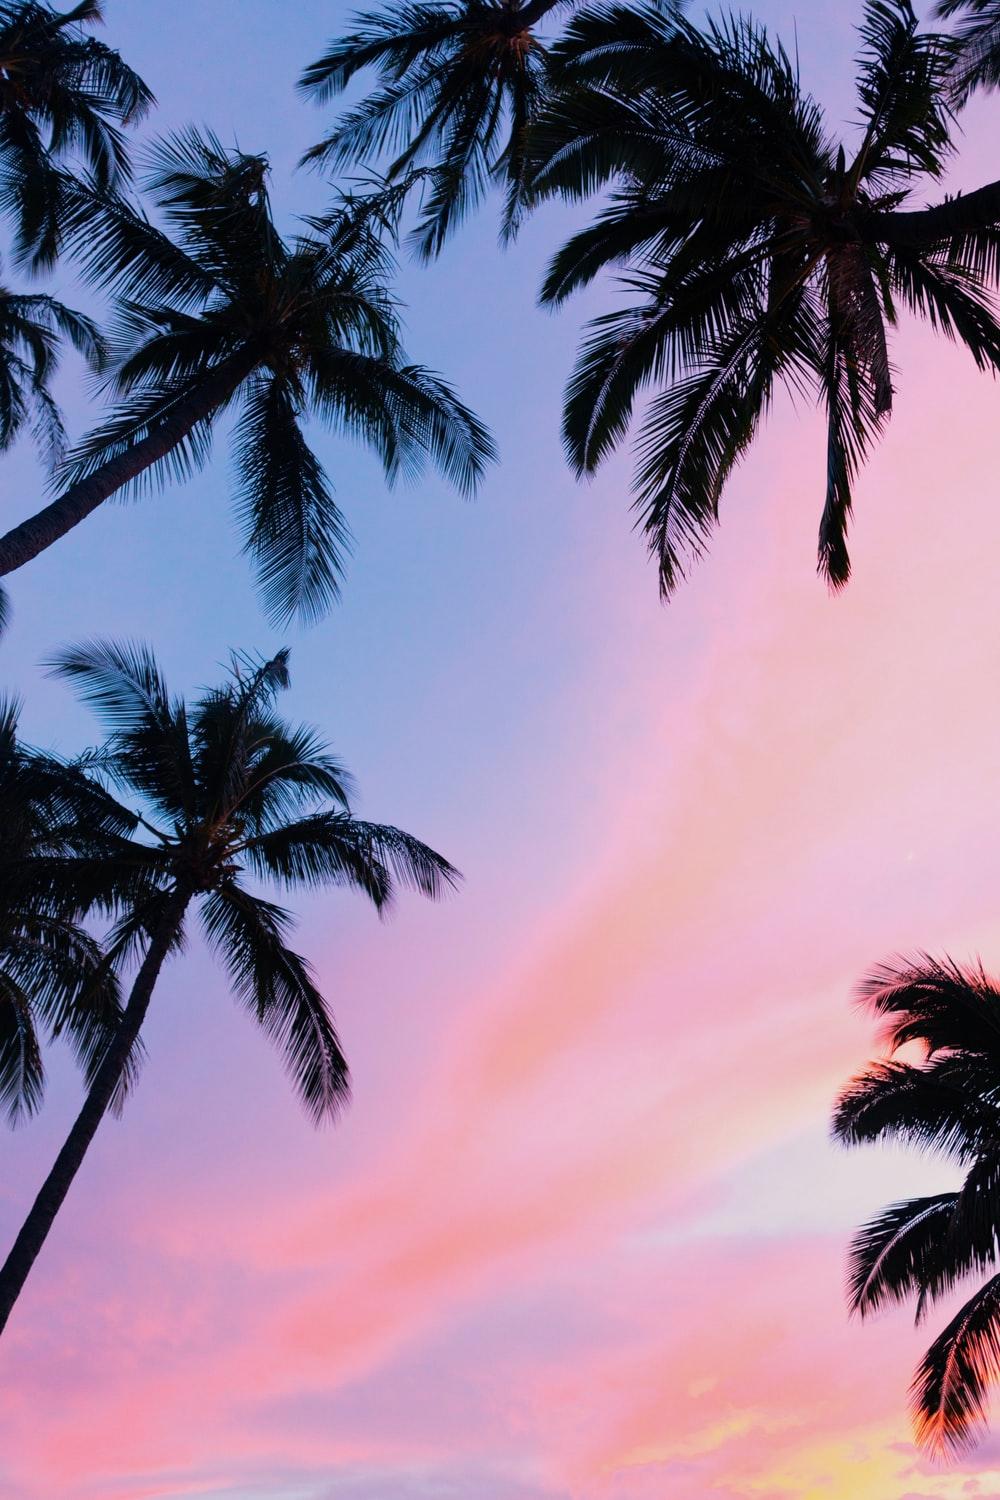 Palm Tree Image: Download HD Picture & Photo